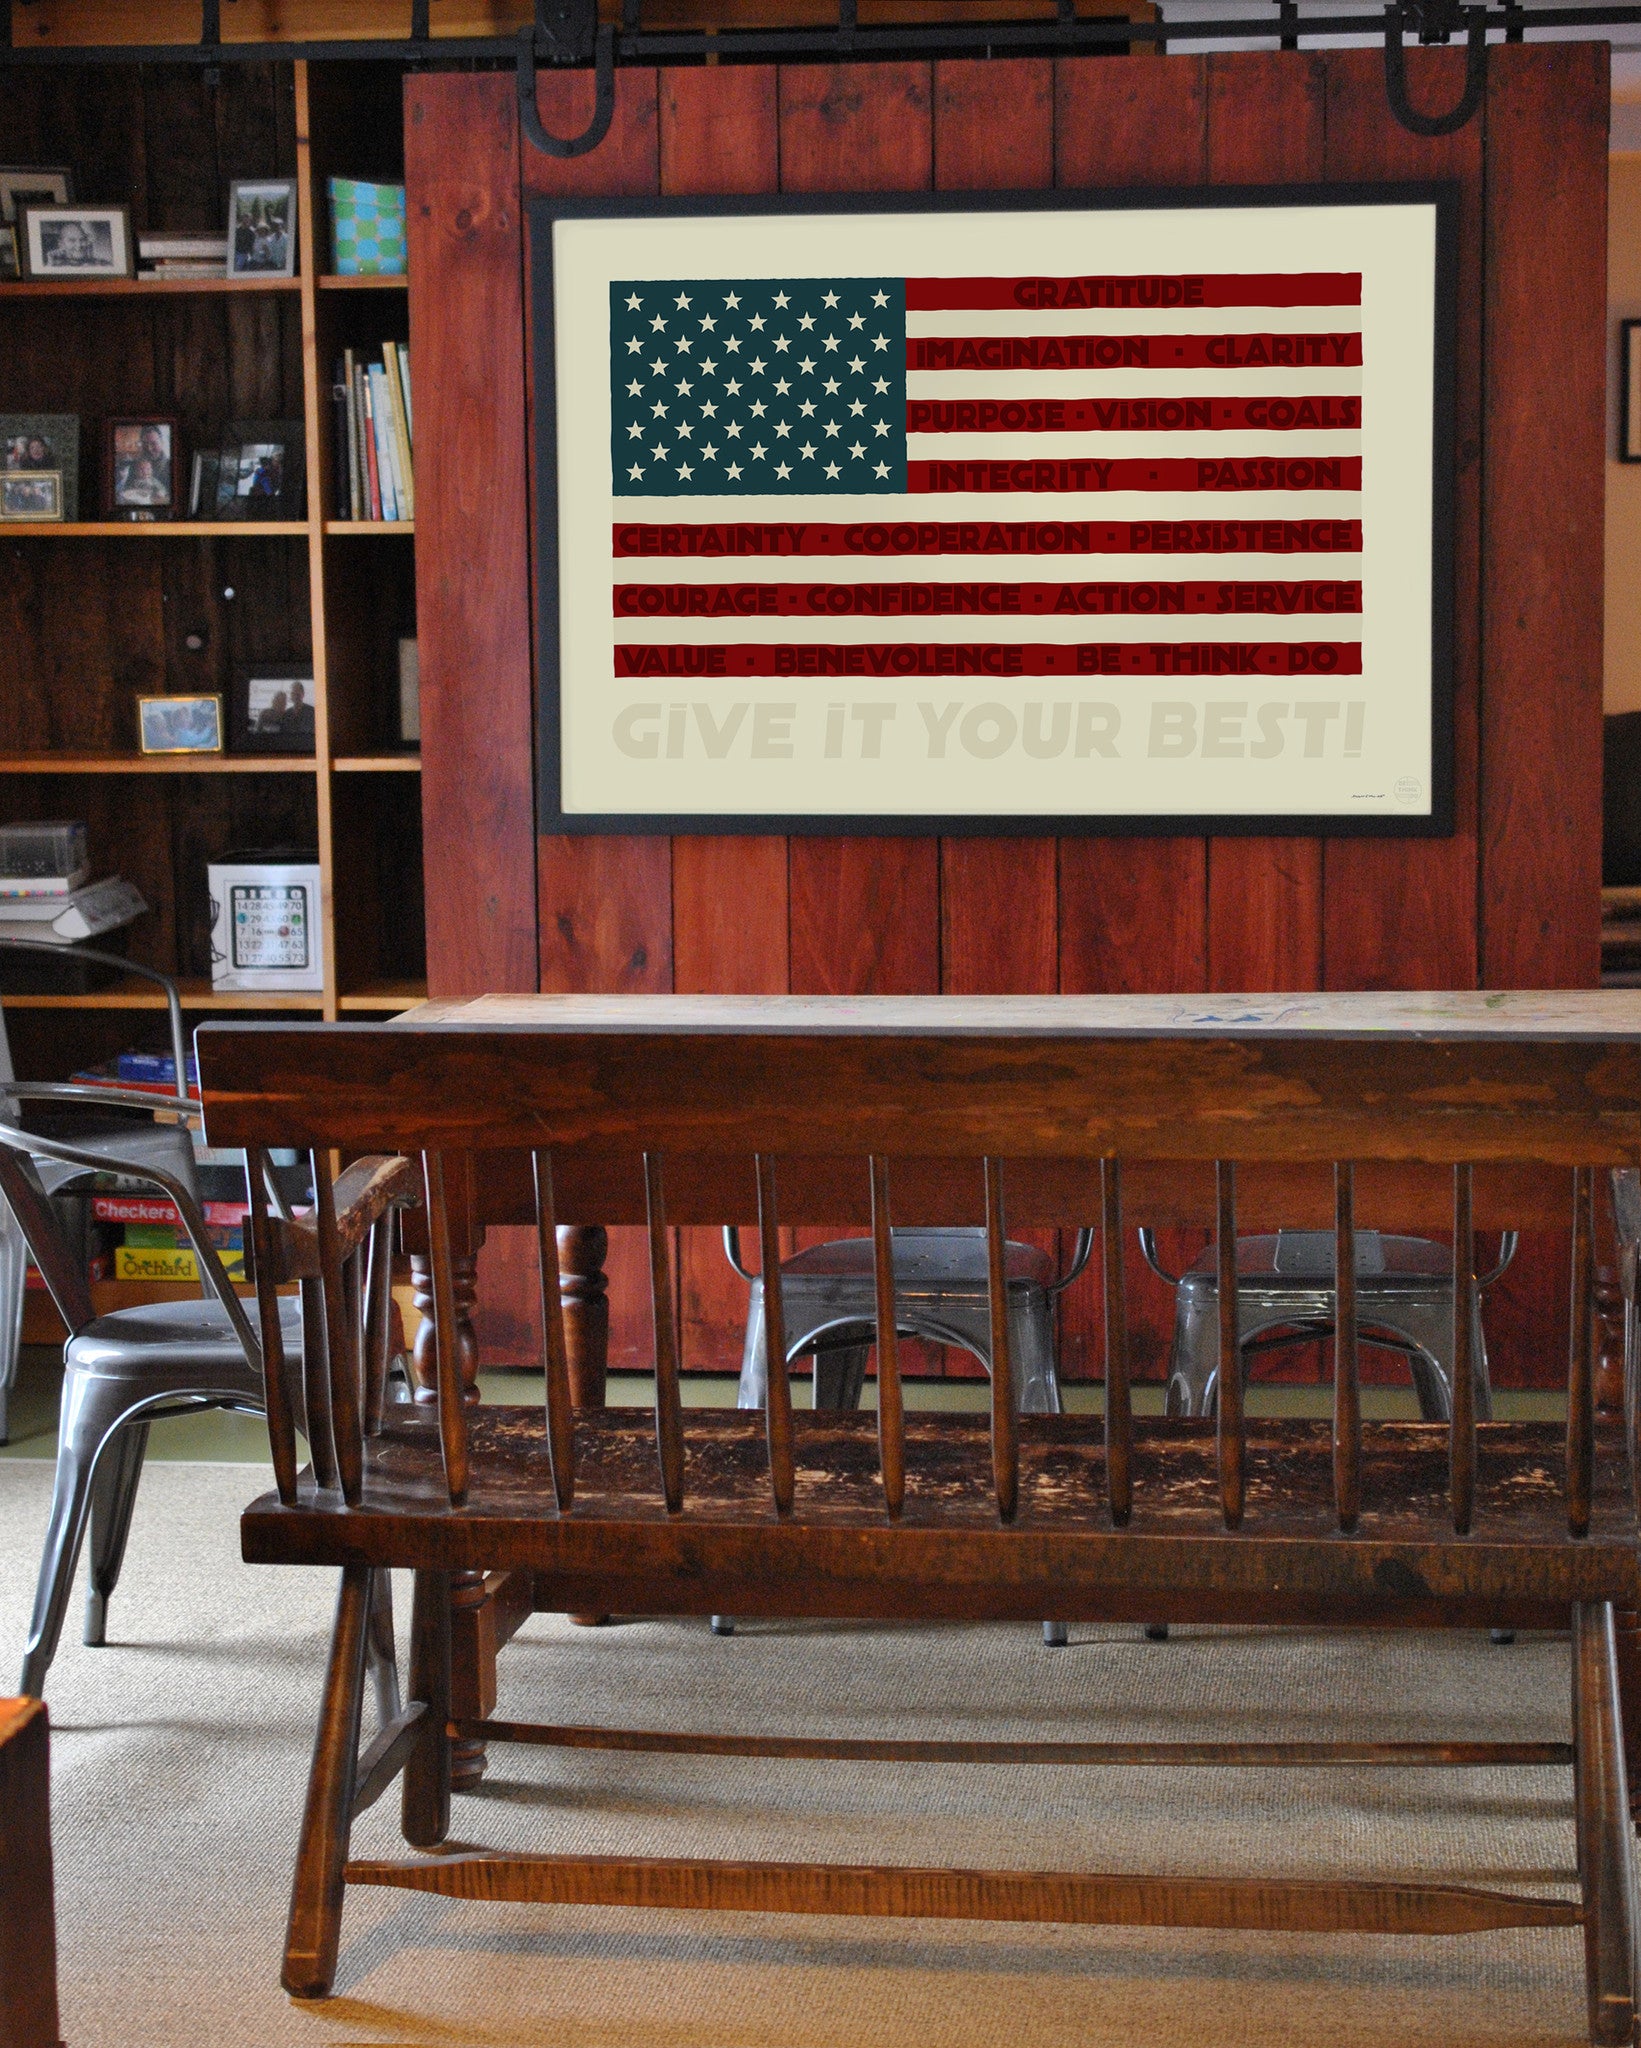 GIVE IT YOUR BEST! USA Flag Art Print 36" x 53" Framed Wall Poster